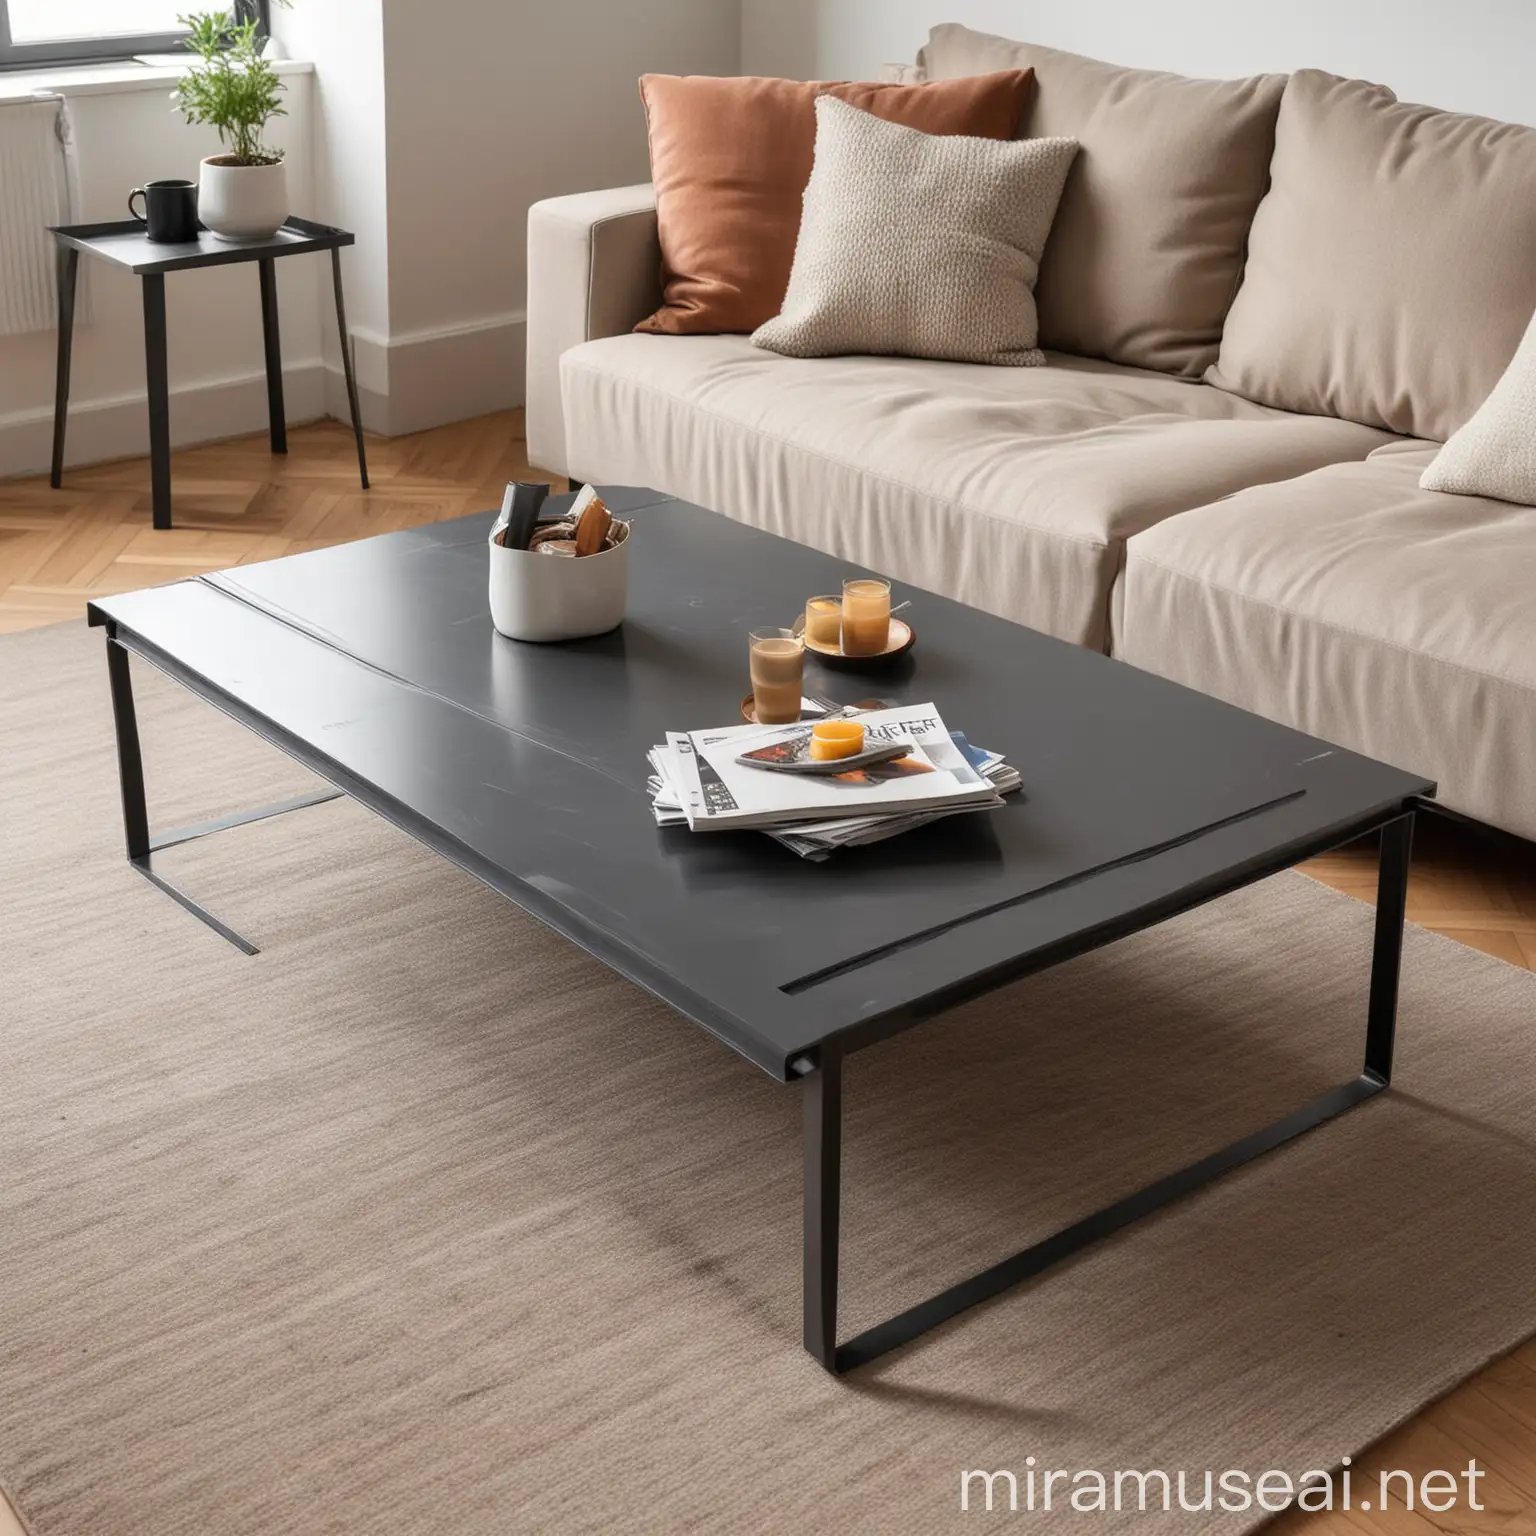 a realistic photo of a coffee table made of sheet steel, without thin table legs but the top plate bent at the sides, with minimalist modern design, in the background a simple but cozy-looking sofa, the photo is for a website where you can buy this coffee table.